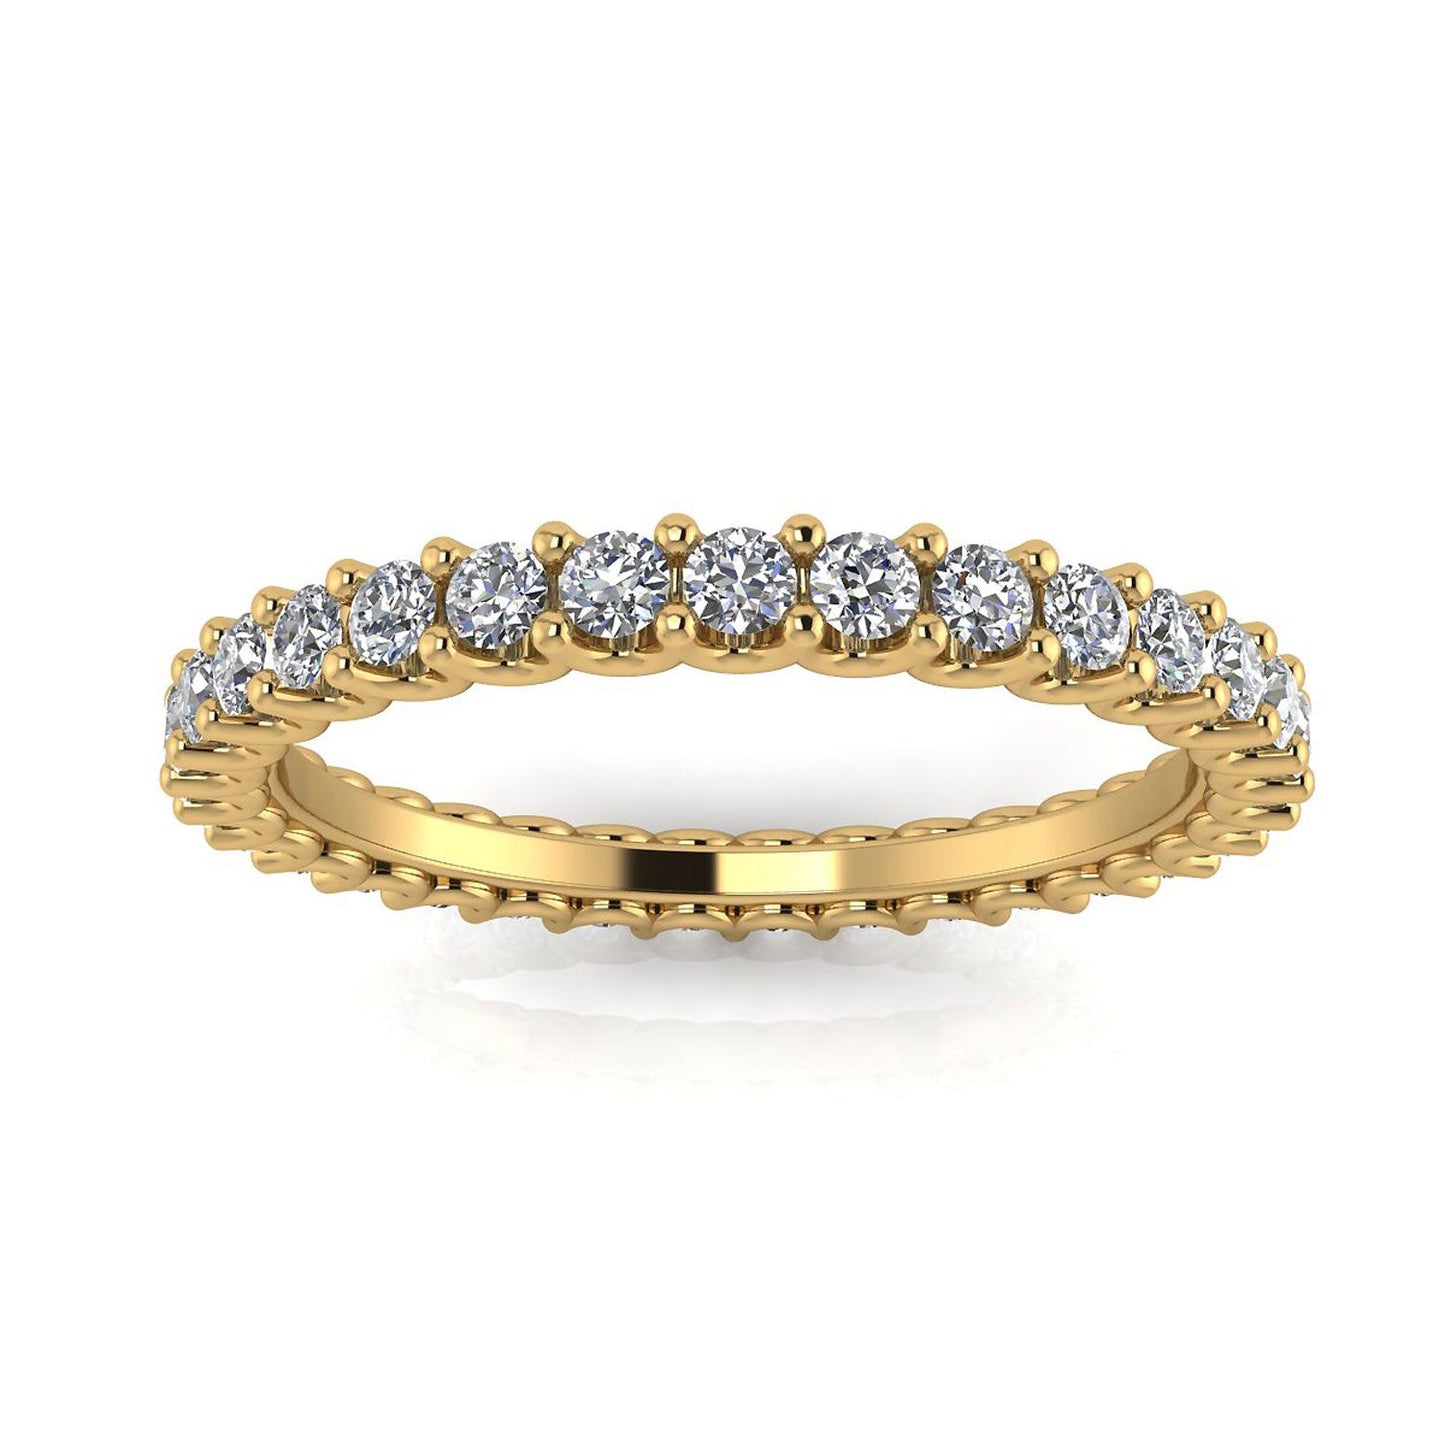 Round Brilliant Cut Diamond Shared Prong Set Eternity Ring In 18k Yellow Gold  (0.51ct. Tw.) Ring Size 8